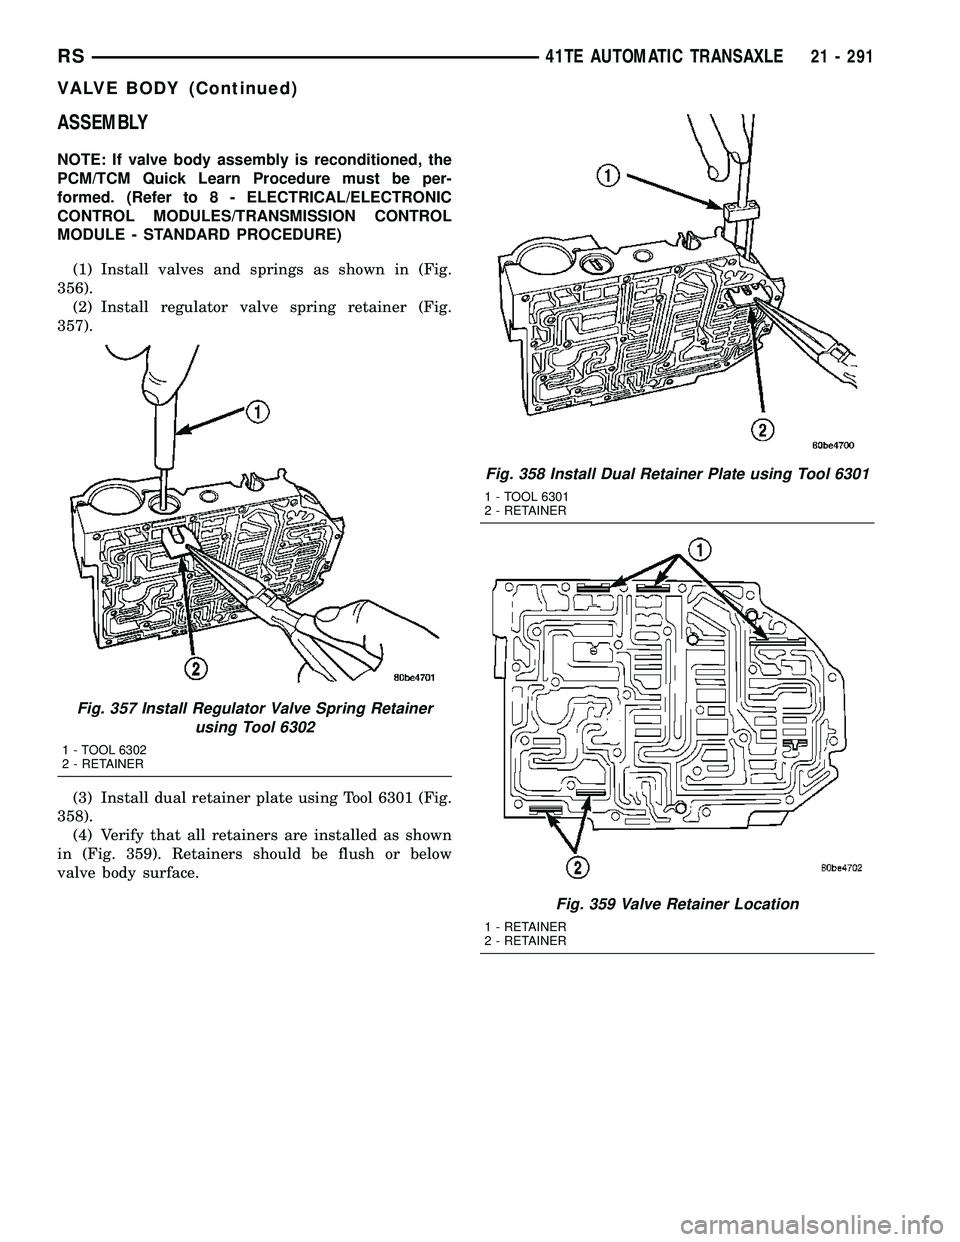 CHRYSLER VOYAGER 2005  Service Manual ASSEMBLY
NOTE: If valve body assembly is reconditioned, the
PCM/TCM Quick Learn Procedure must be per-
formed. (Refer to 8 - ELECTRICAL/ELECTRONIC
CONTROL MODULES/TRANSMISSION CONTROL
MODULE - STANDAR